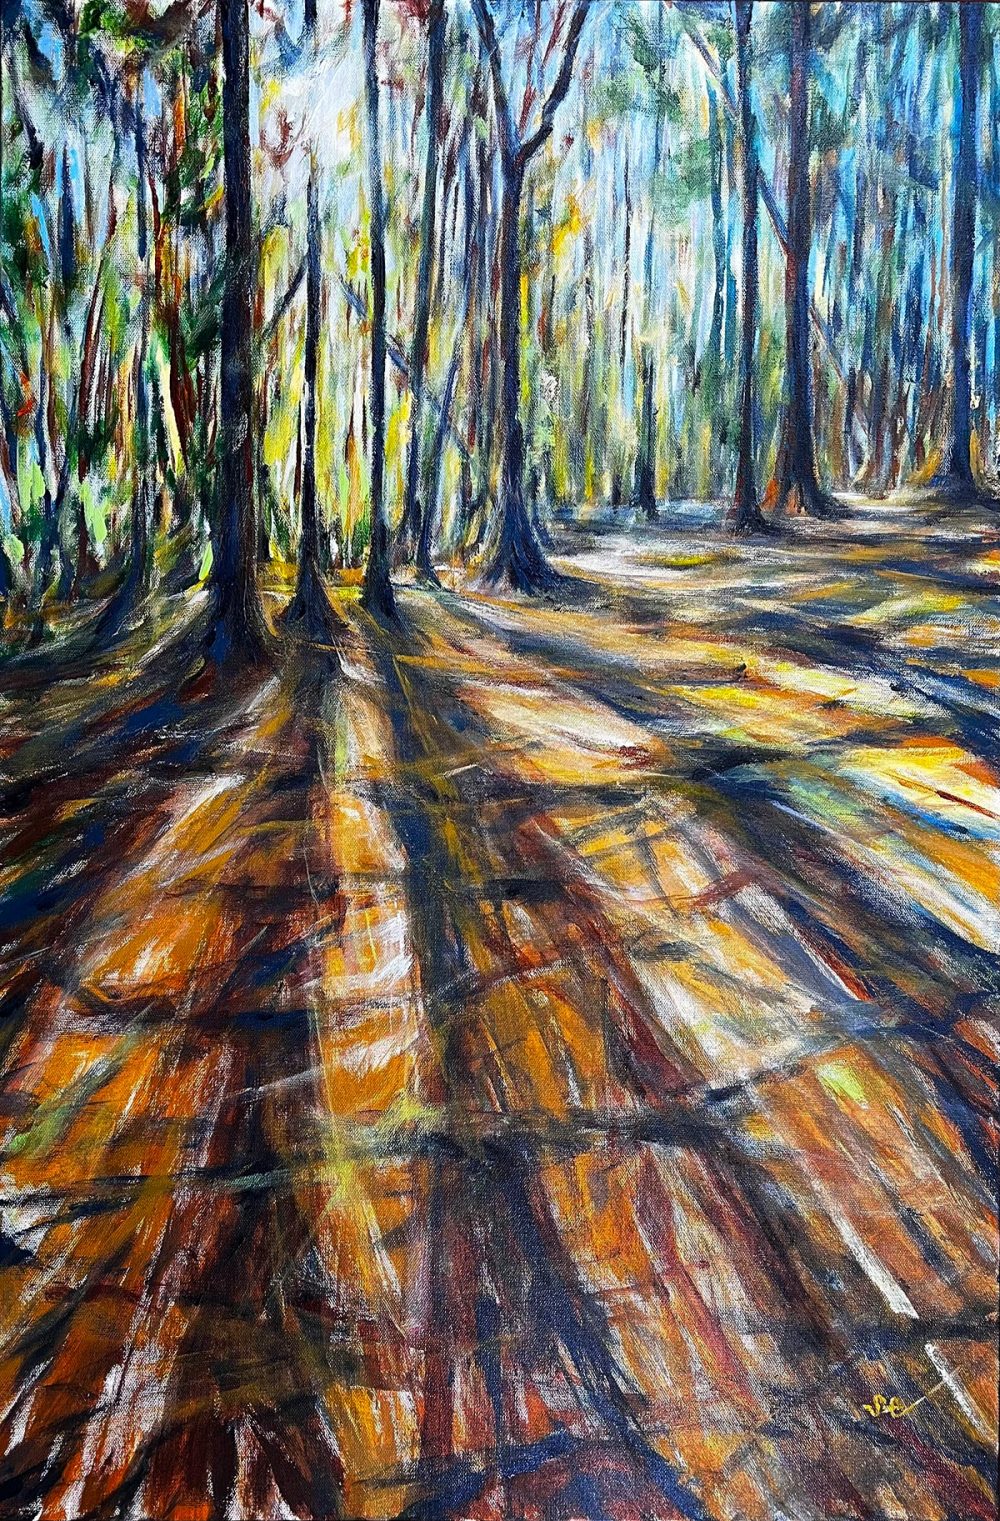 A landscape painting titled The Air Talks Here by Samantha Eio of sun filtering through trees across a forest trail